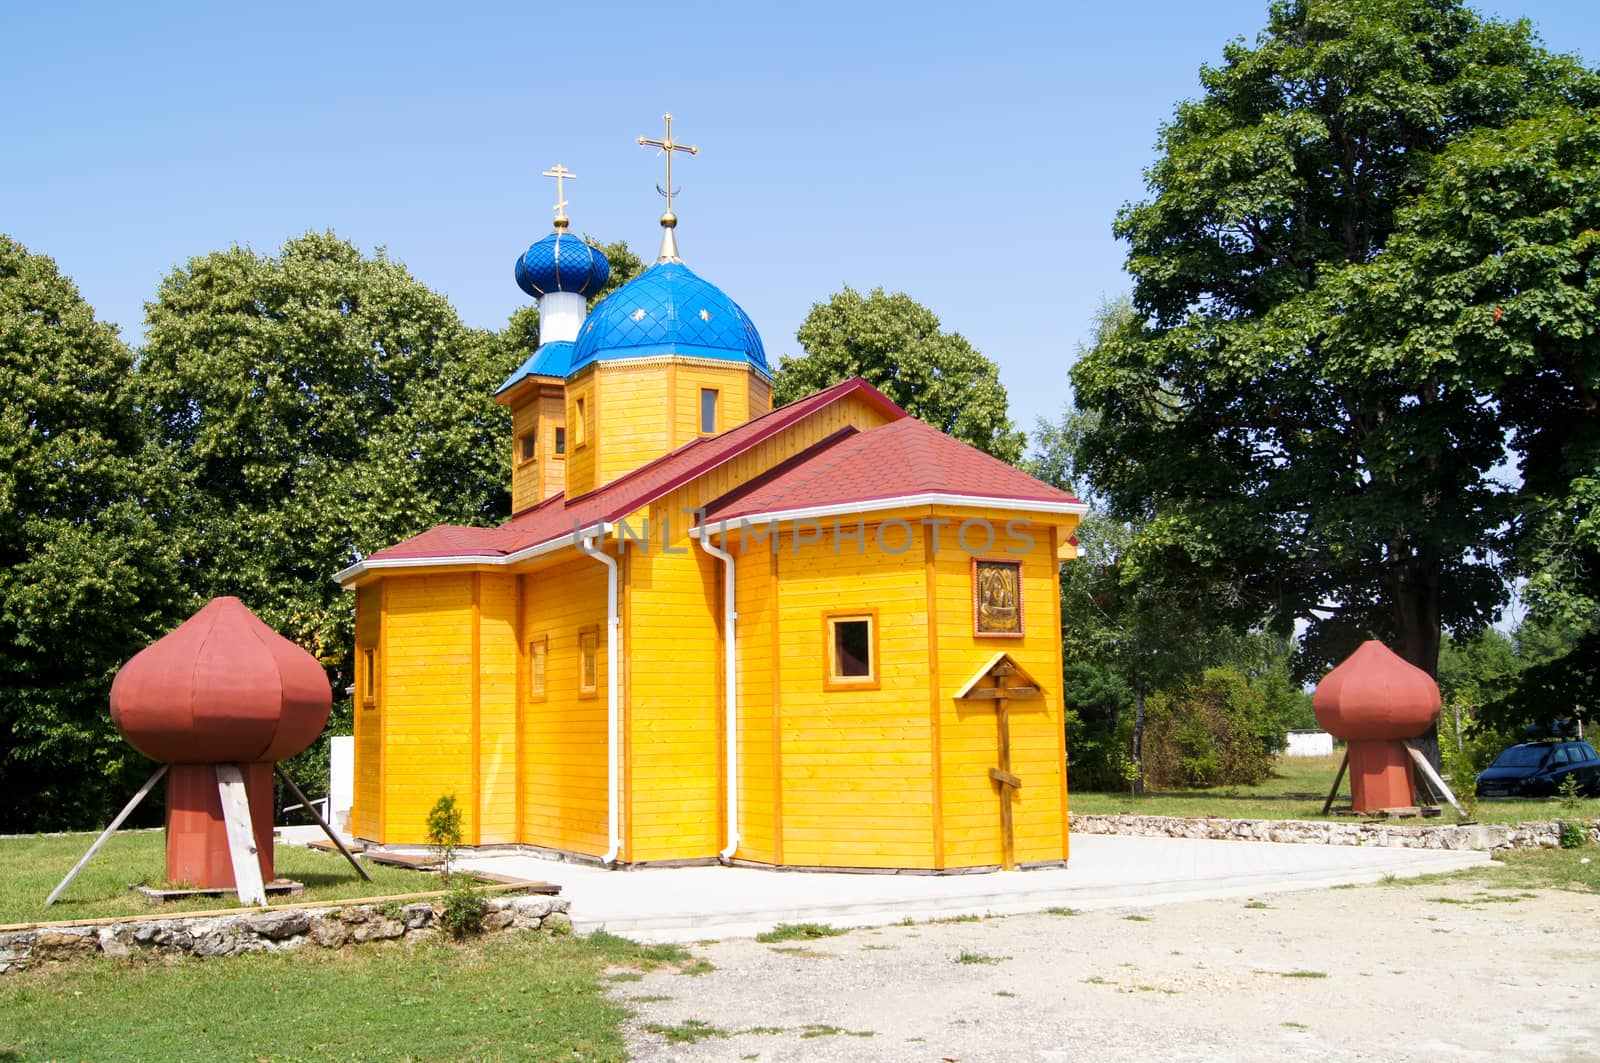 Man's monastery in the south of Russia